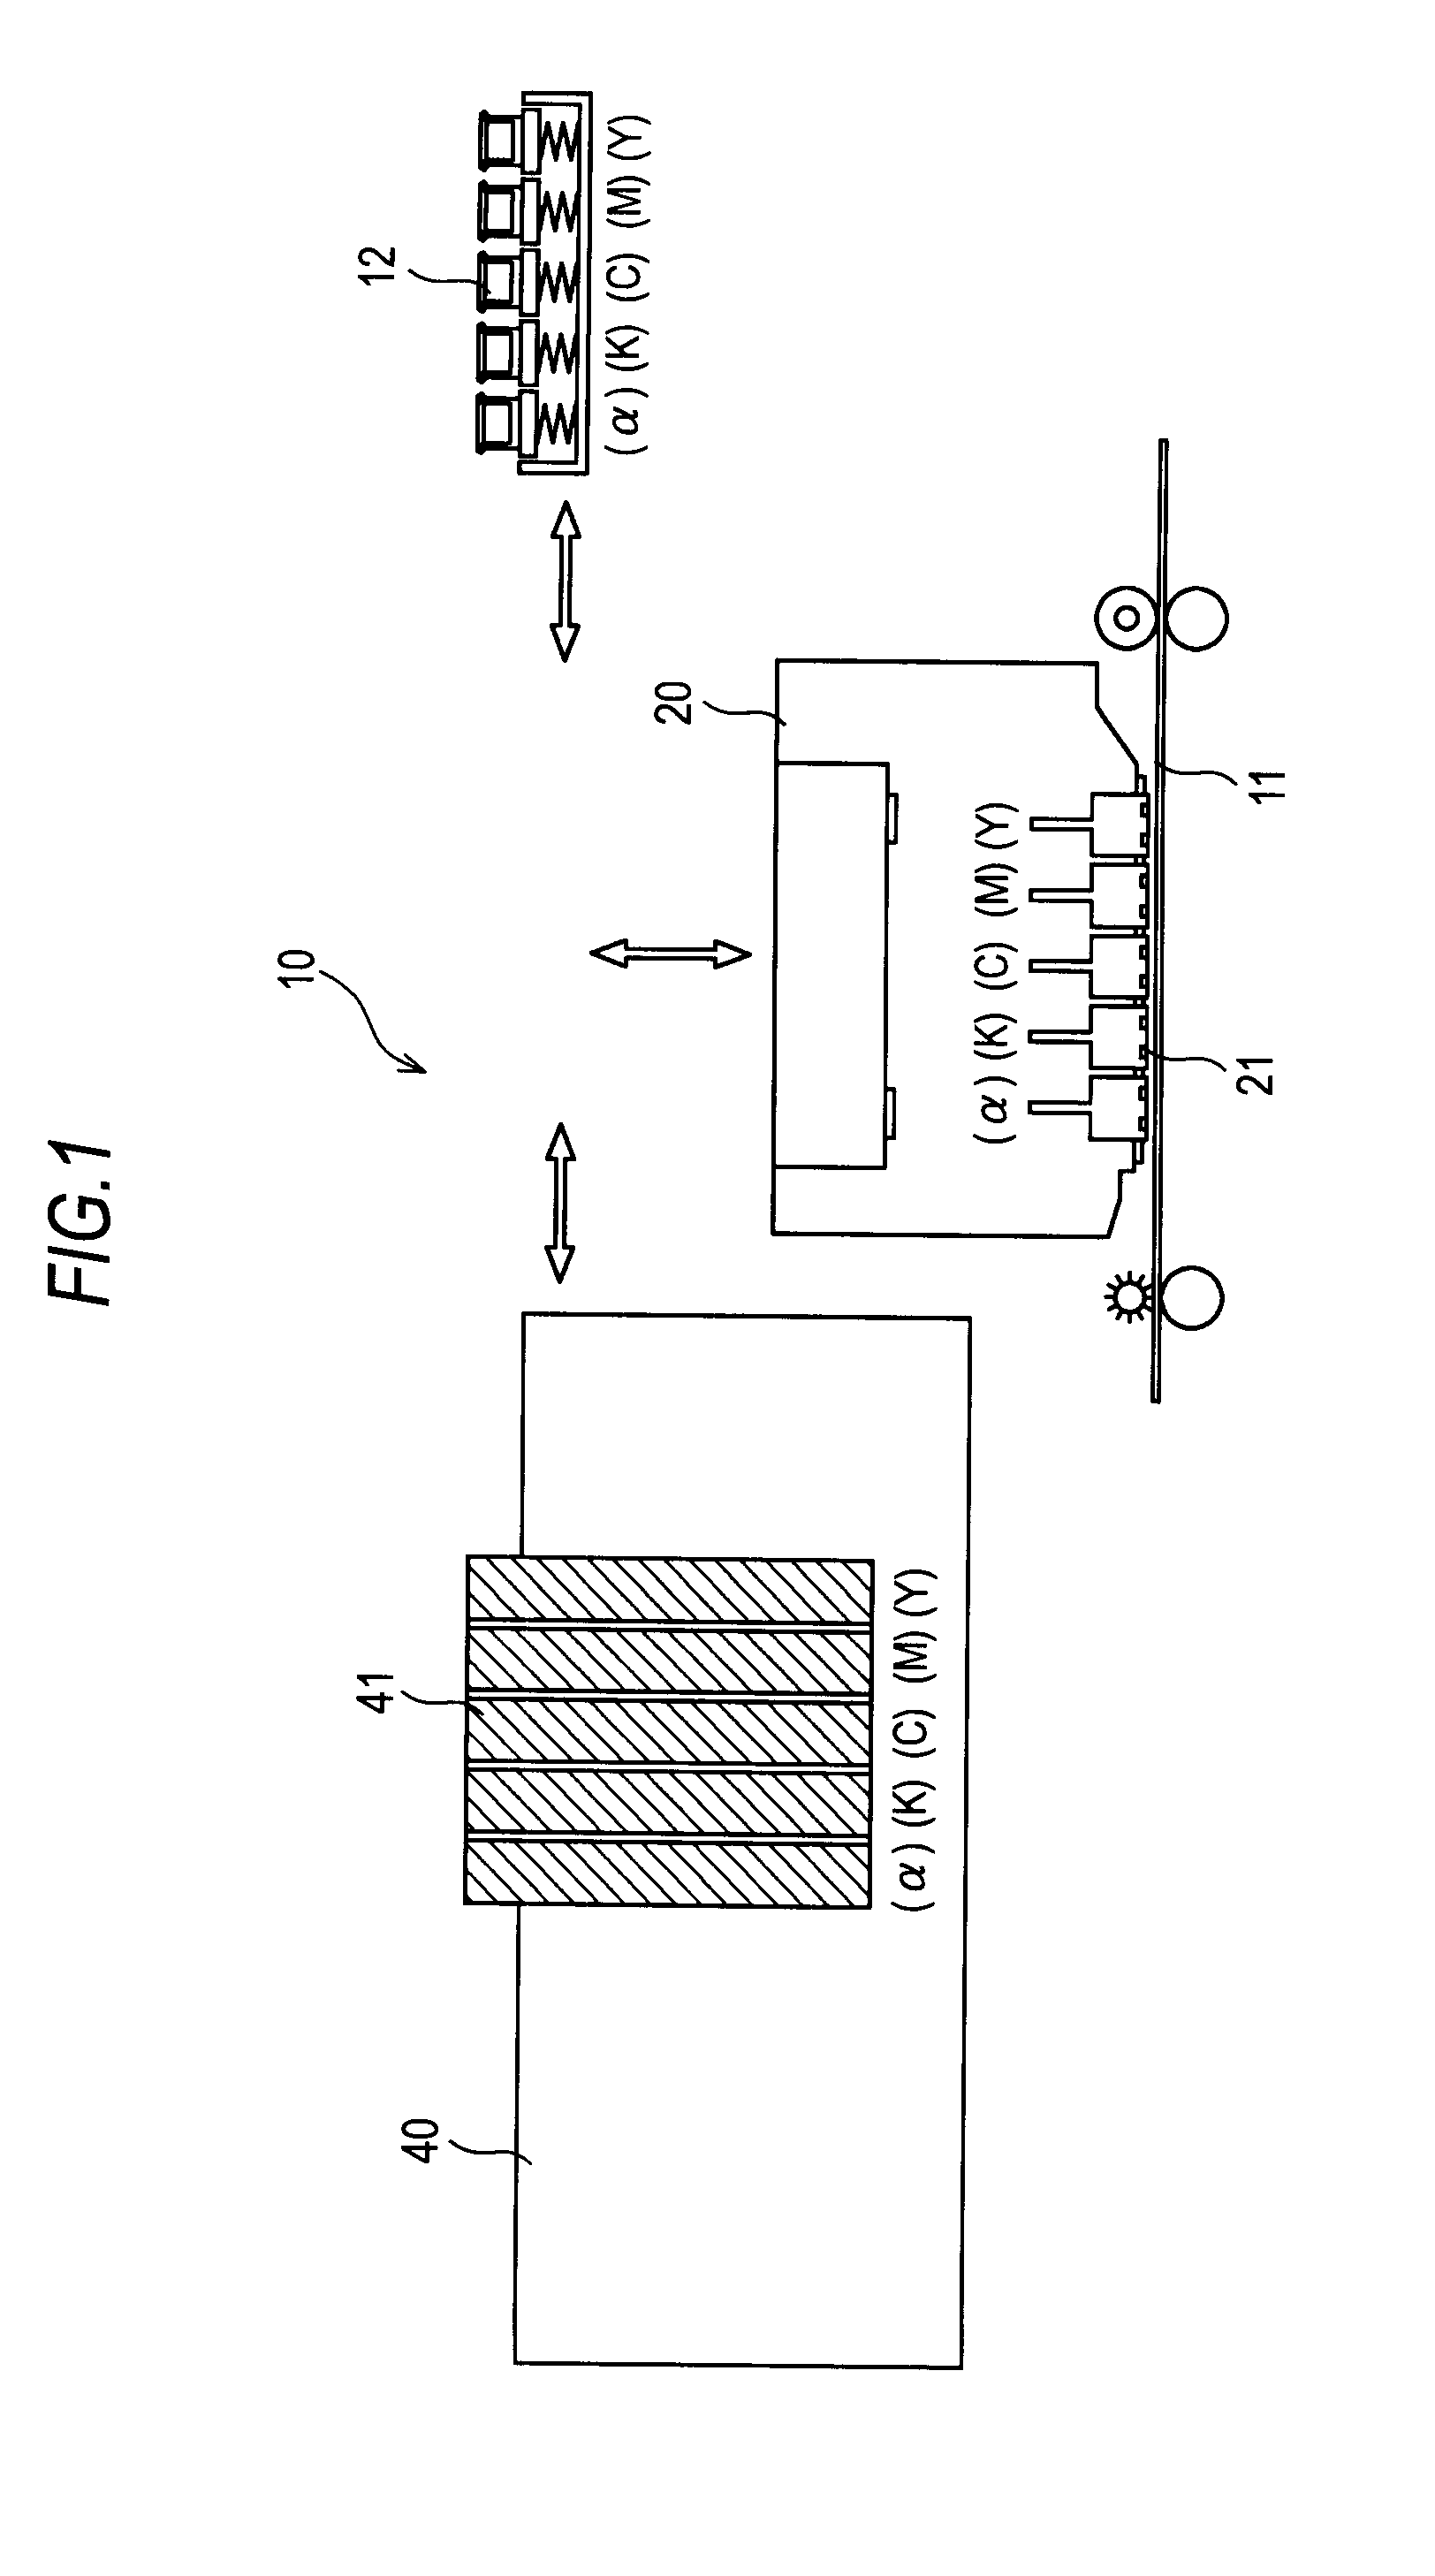 Liquid discharge apparatus having cleaning belts in the shape of a Mobius strip and method of controlling the same